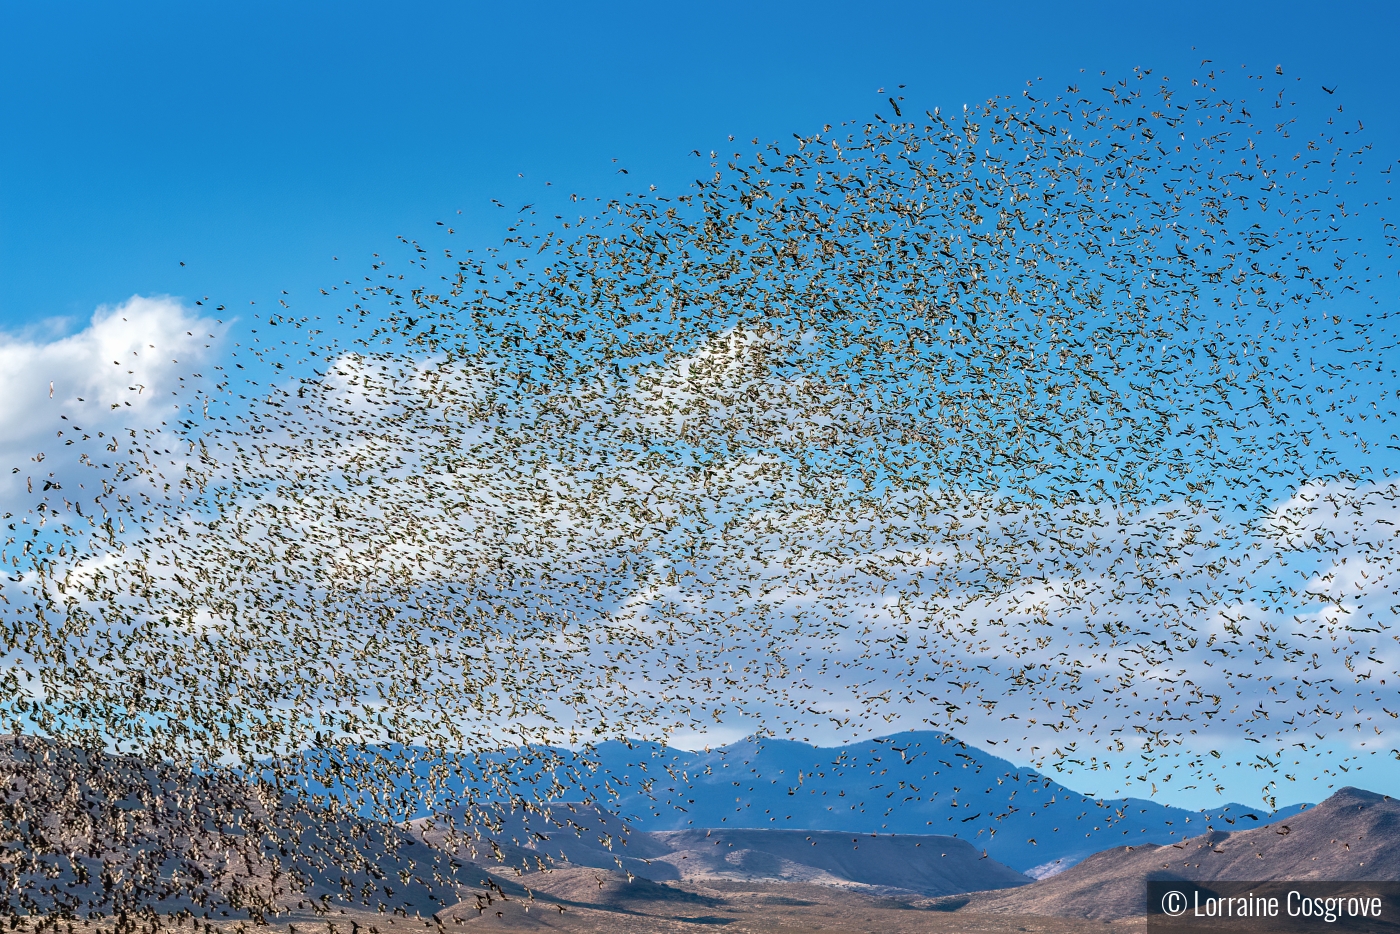 Bird Migration in New Mexico by Lorraine Cosgrove